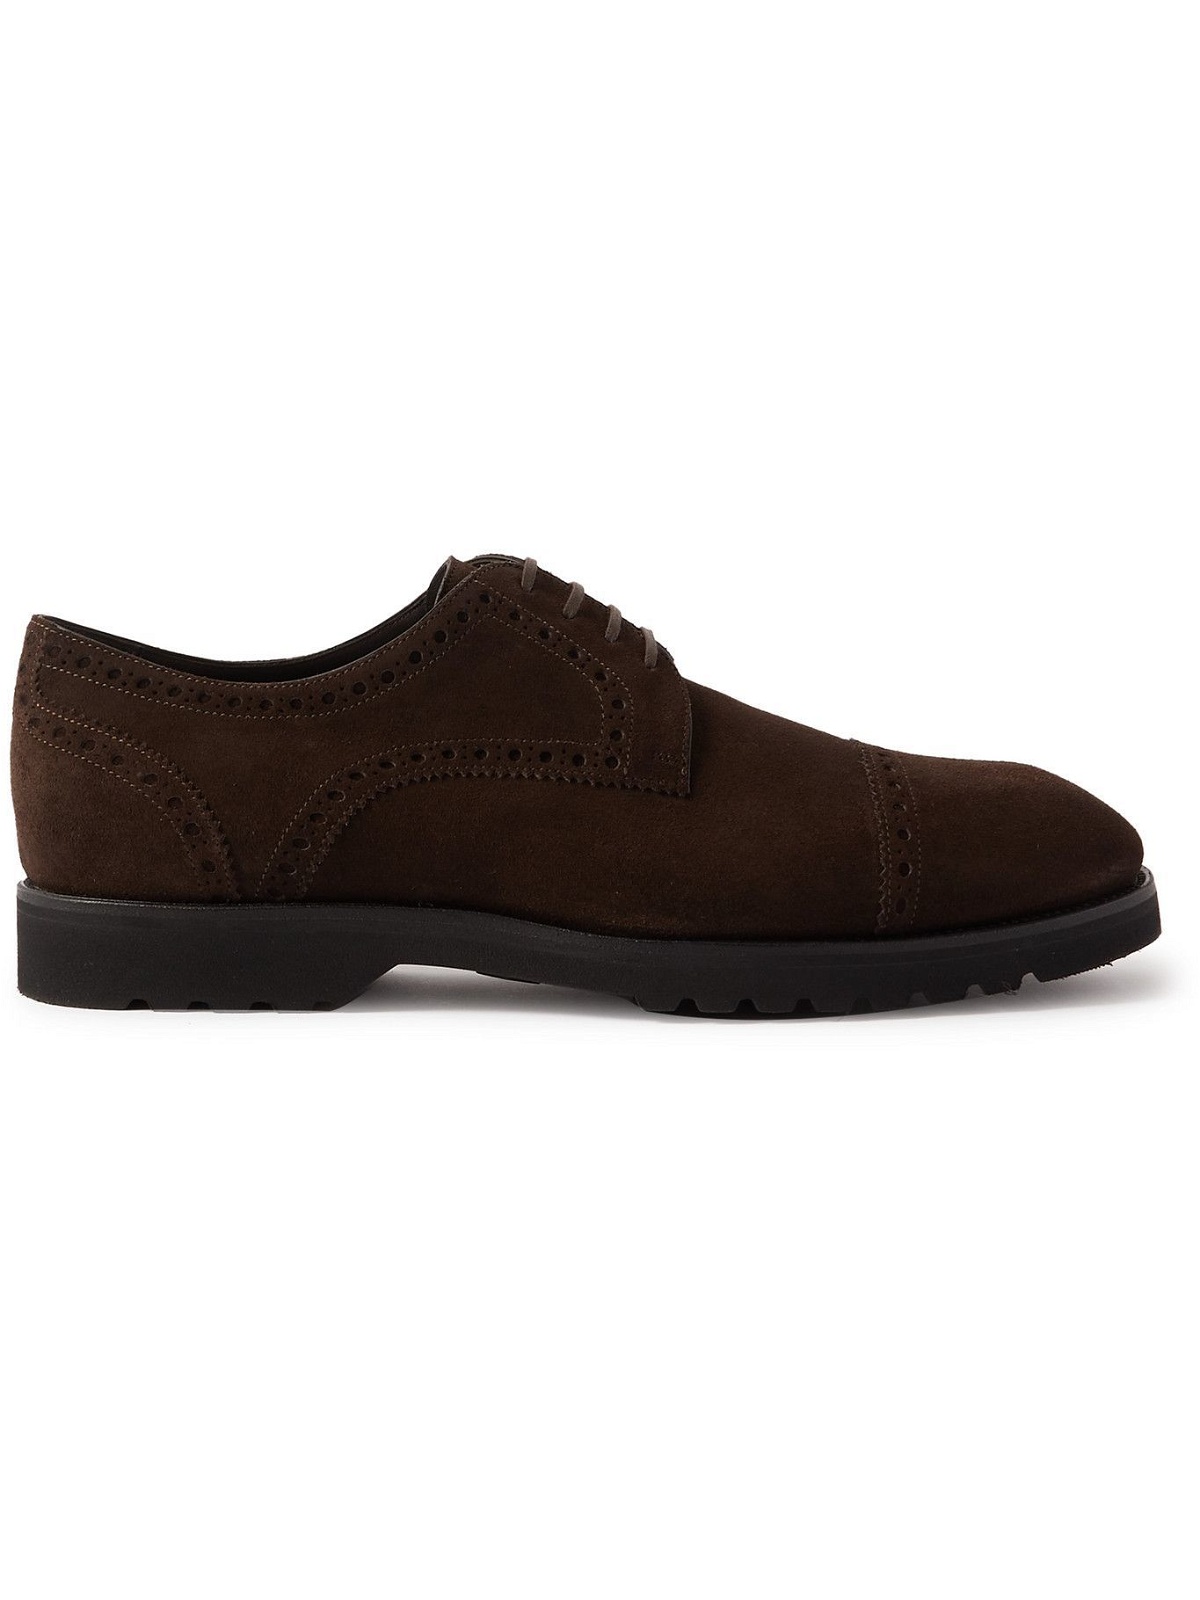 Photo: TOM FORD - Suede Brogues - Brown